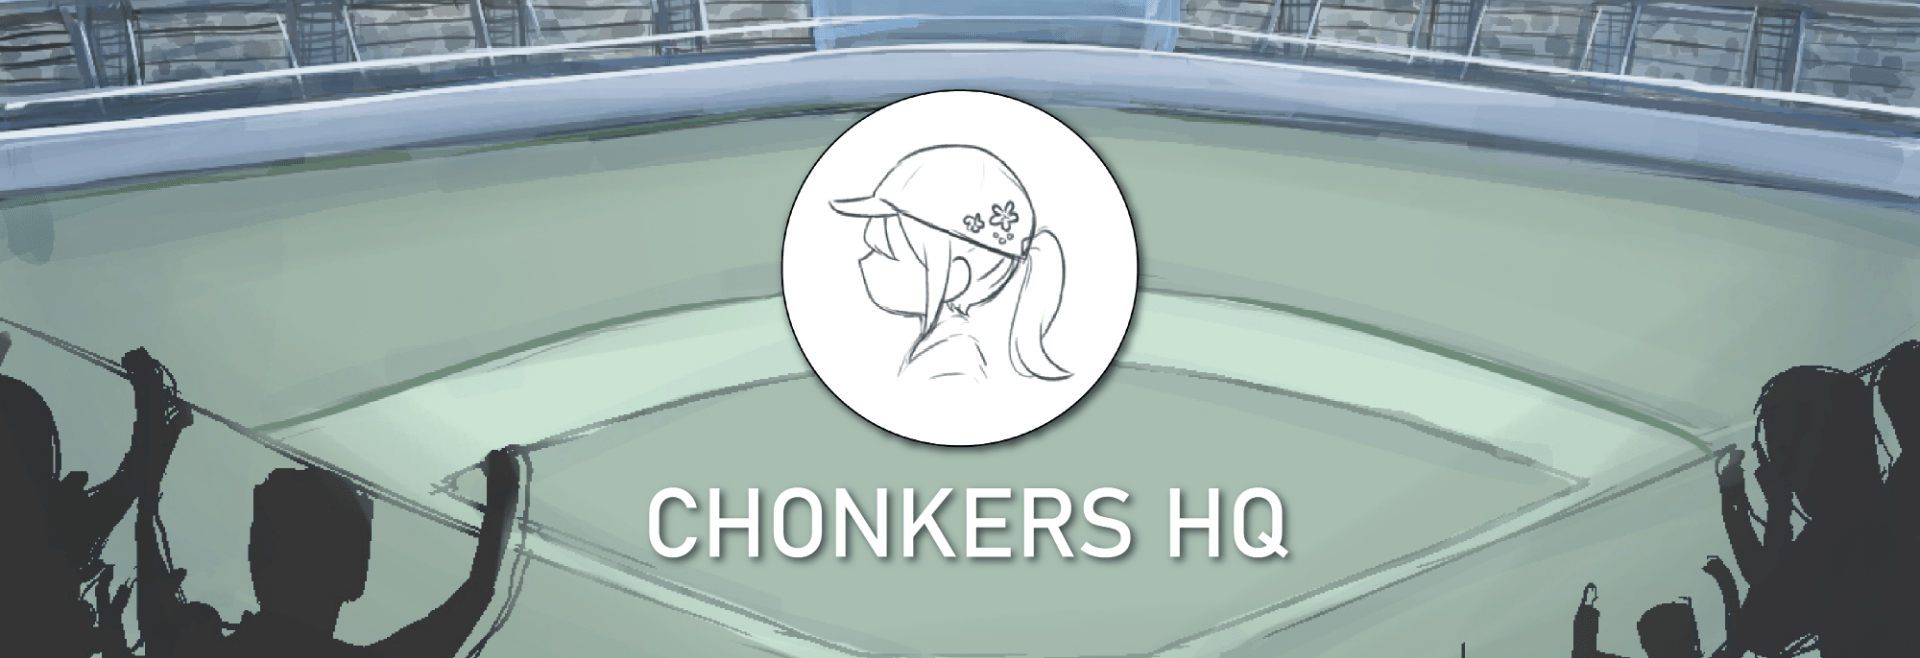 Chonkers HQ Banner